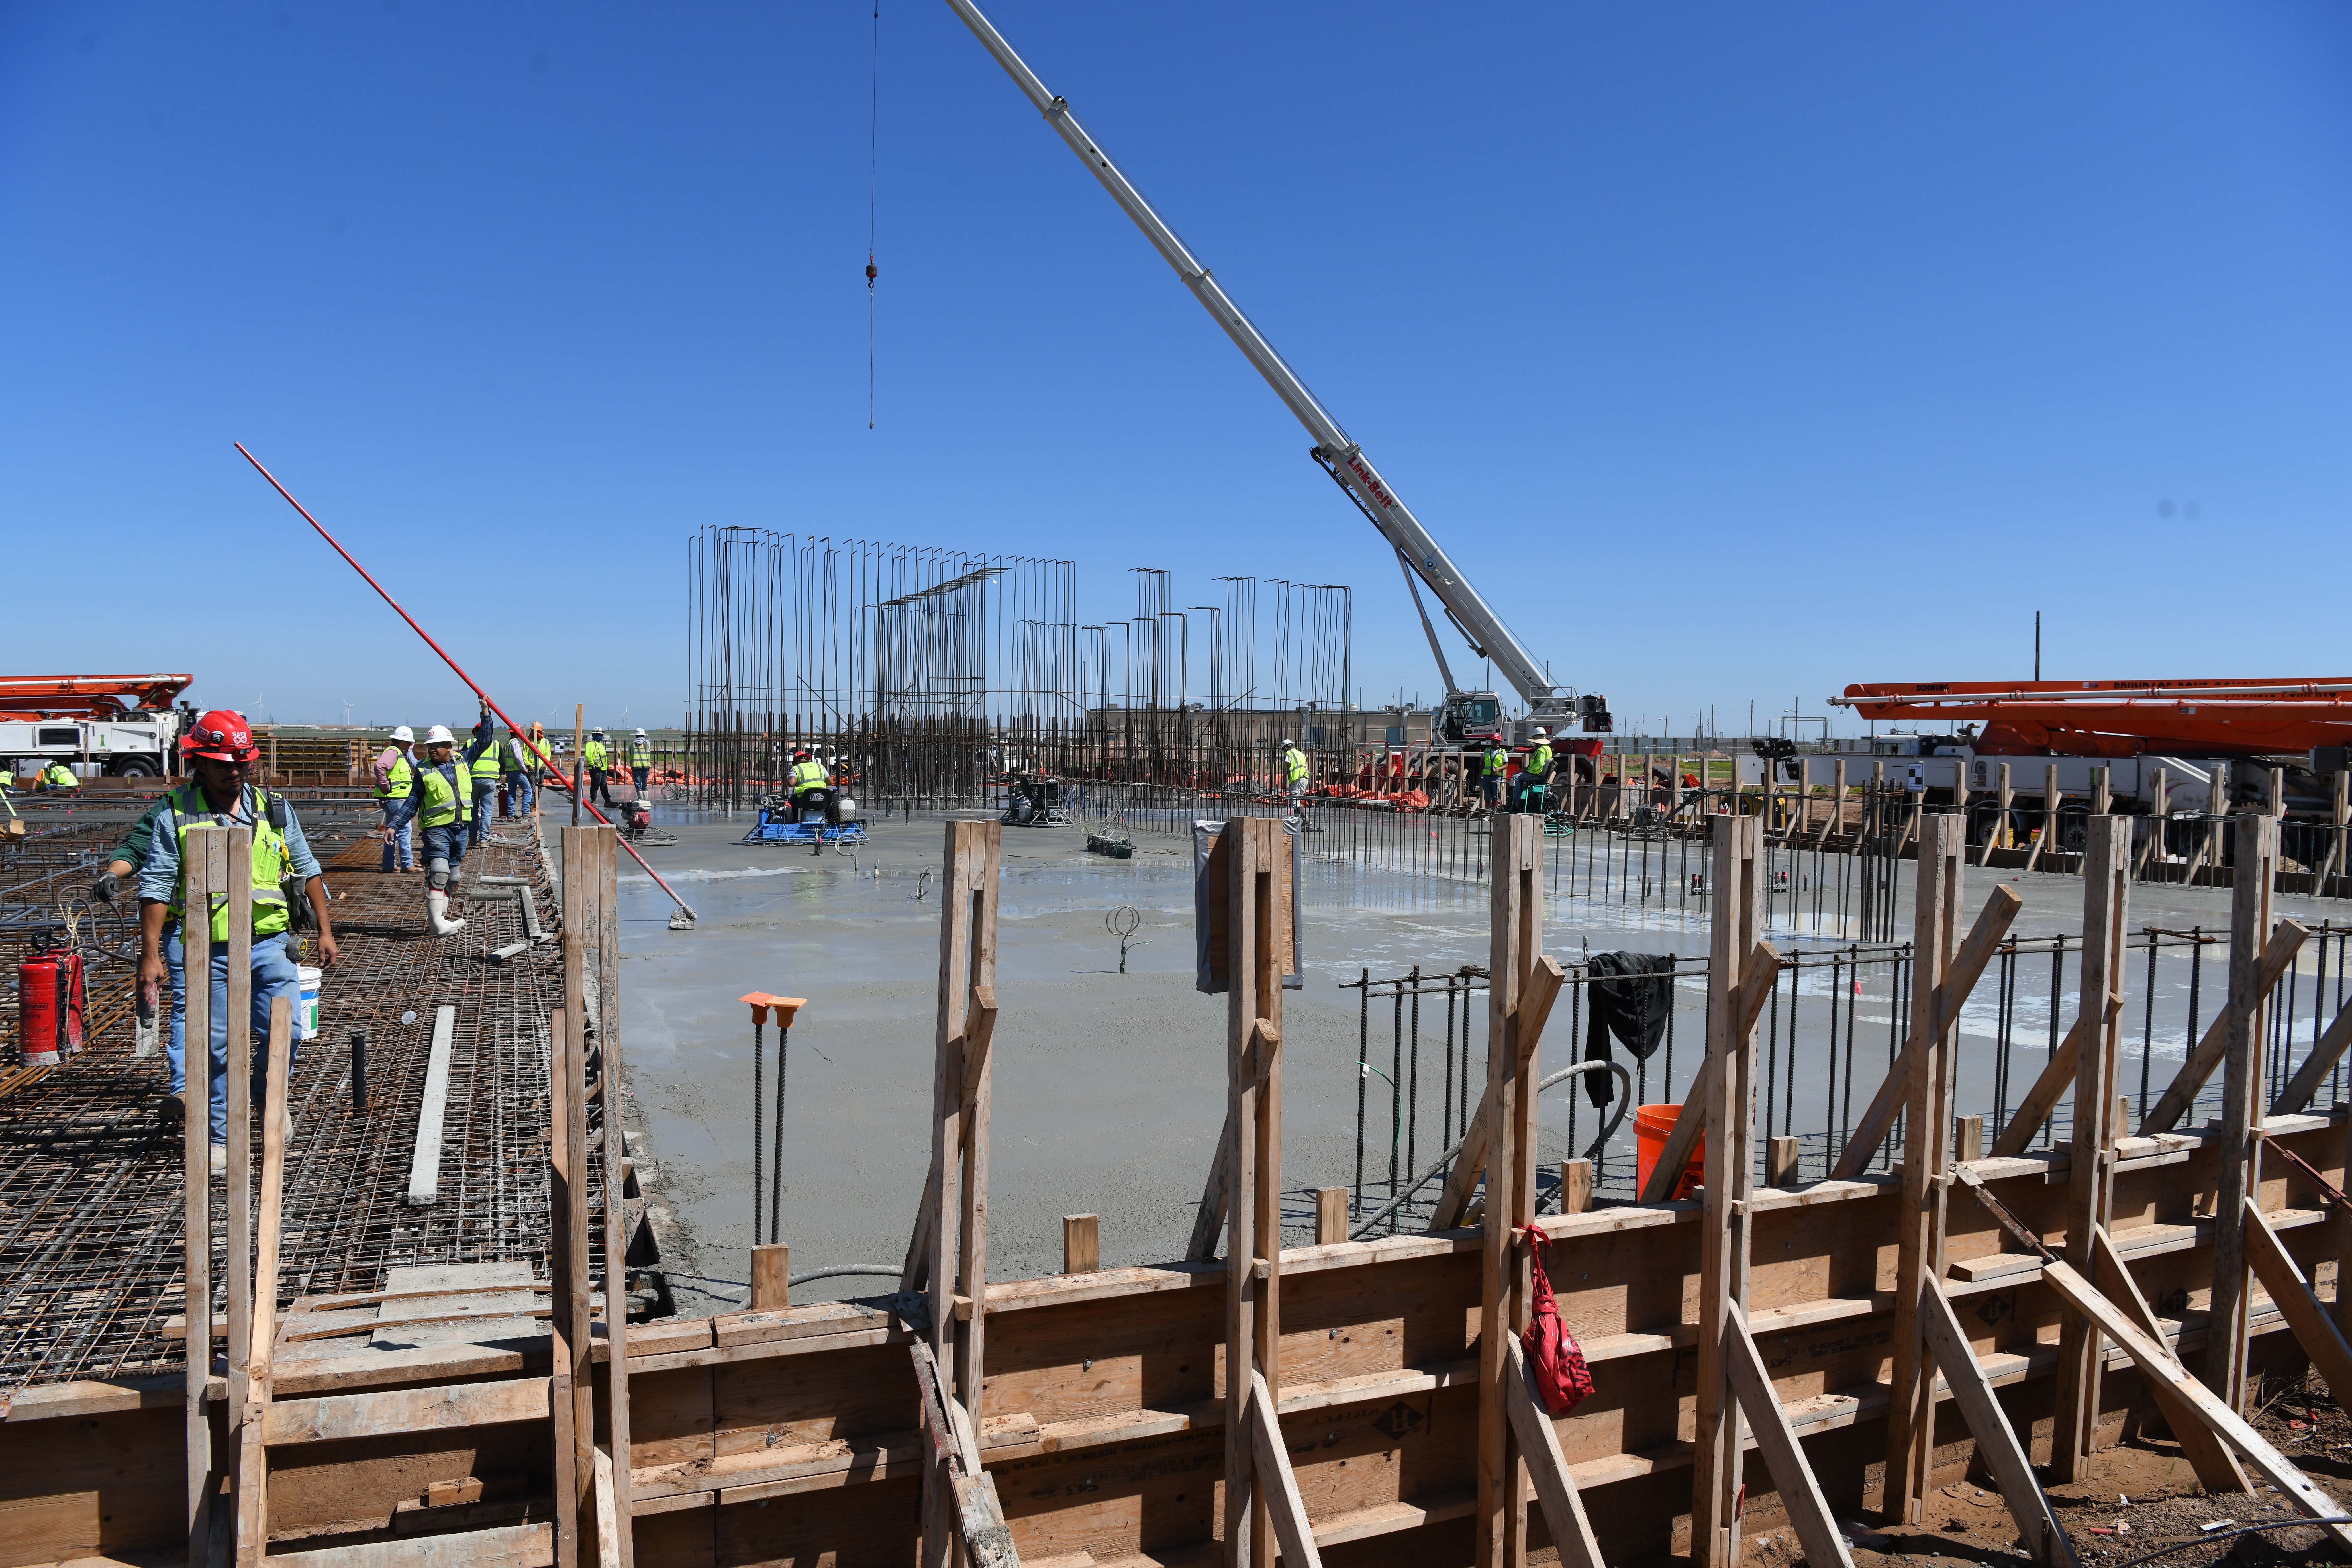 The project is expected to use more than 11,751 cubic yards of concrete